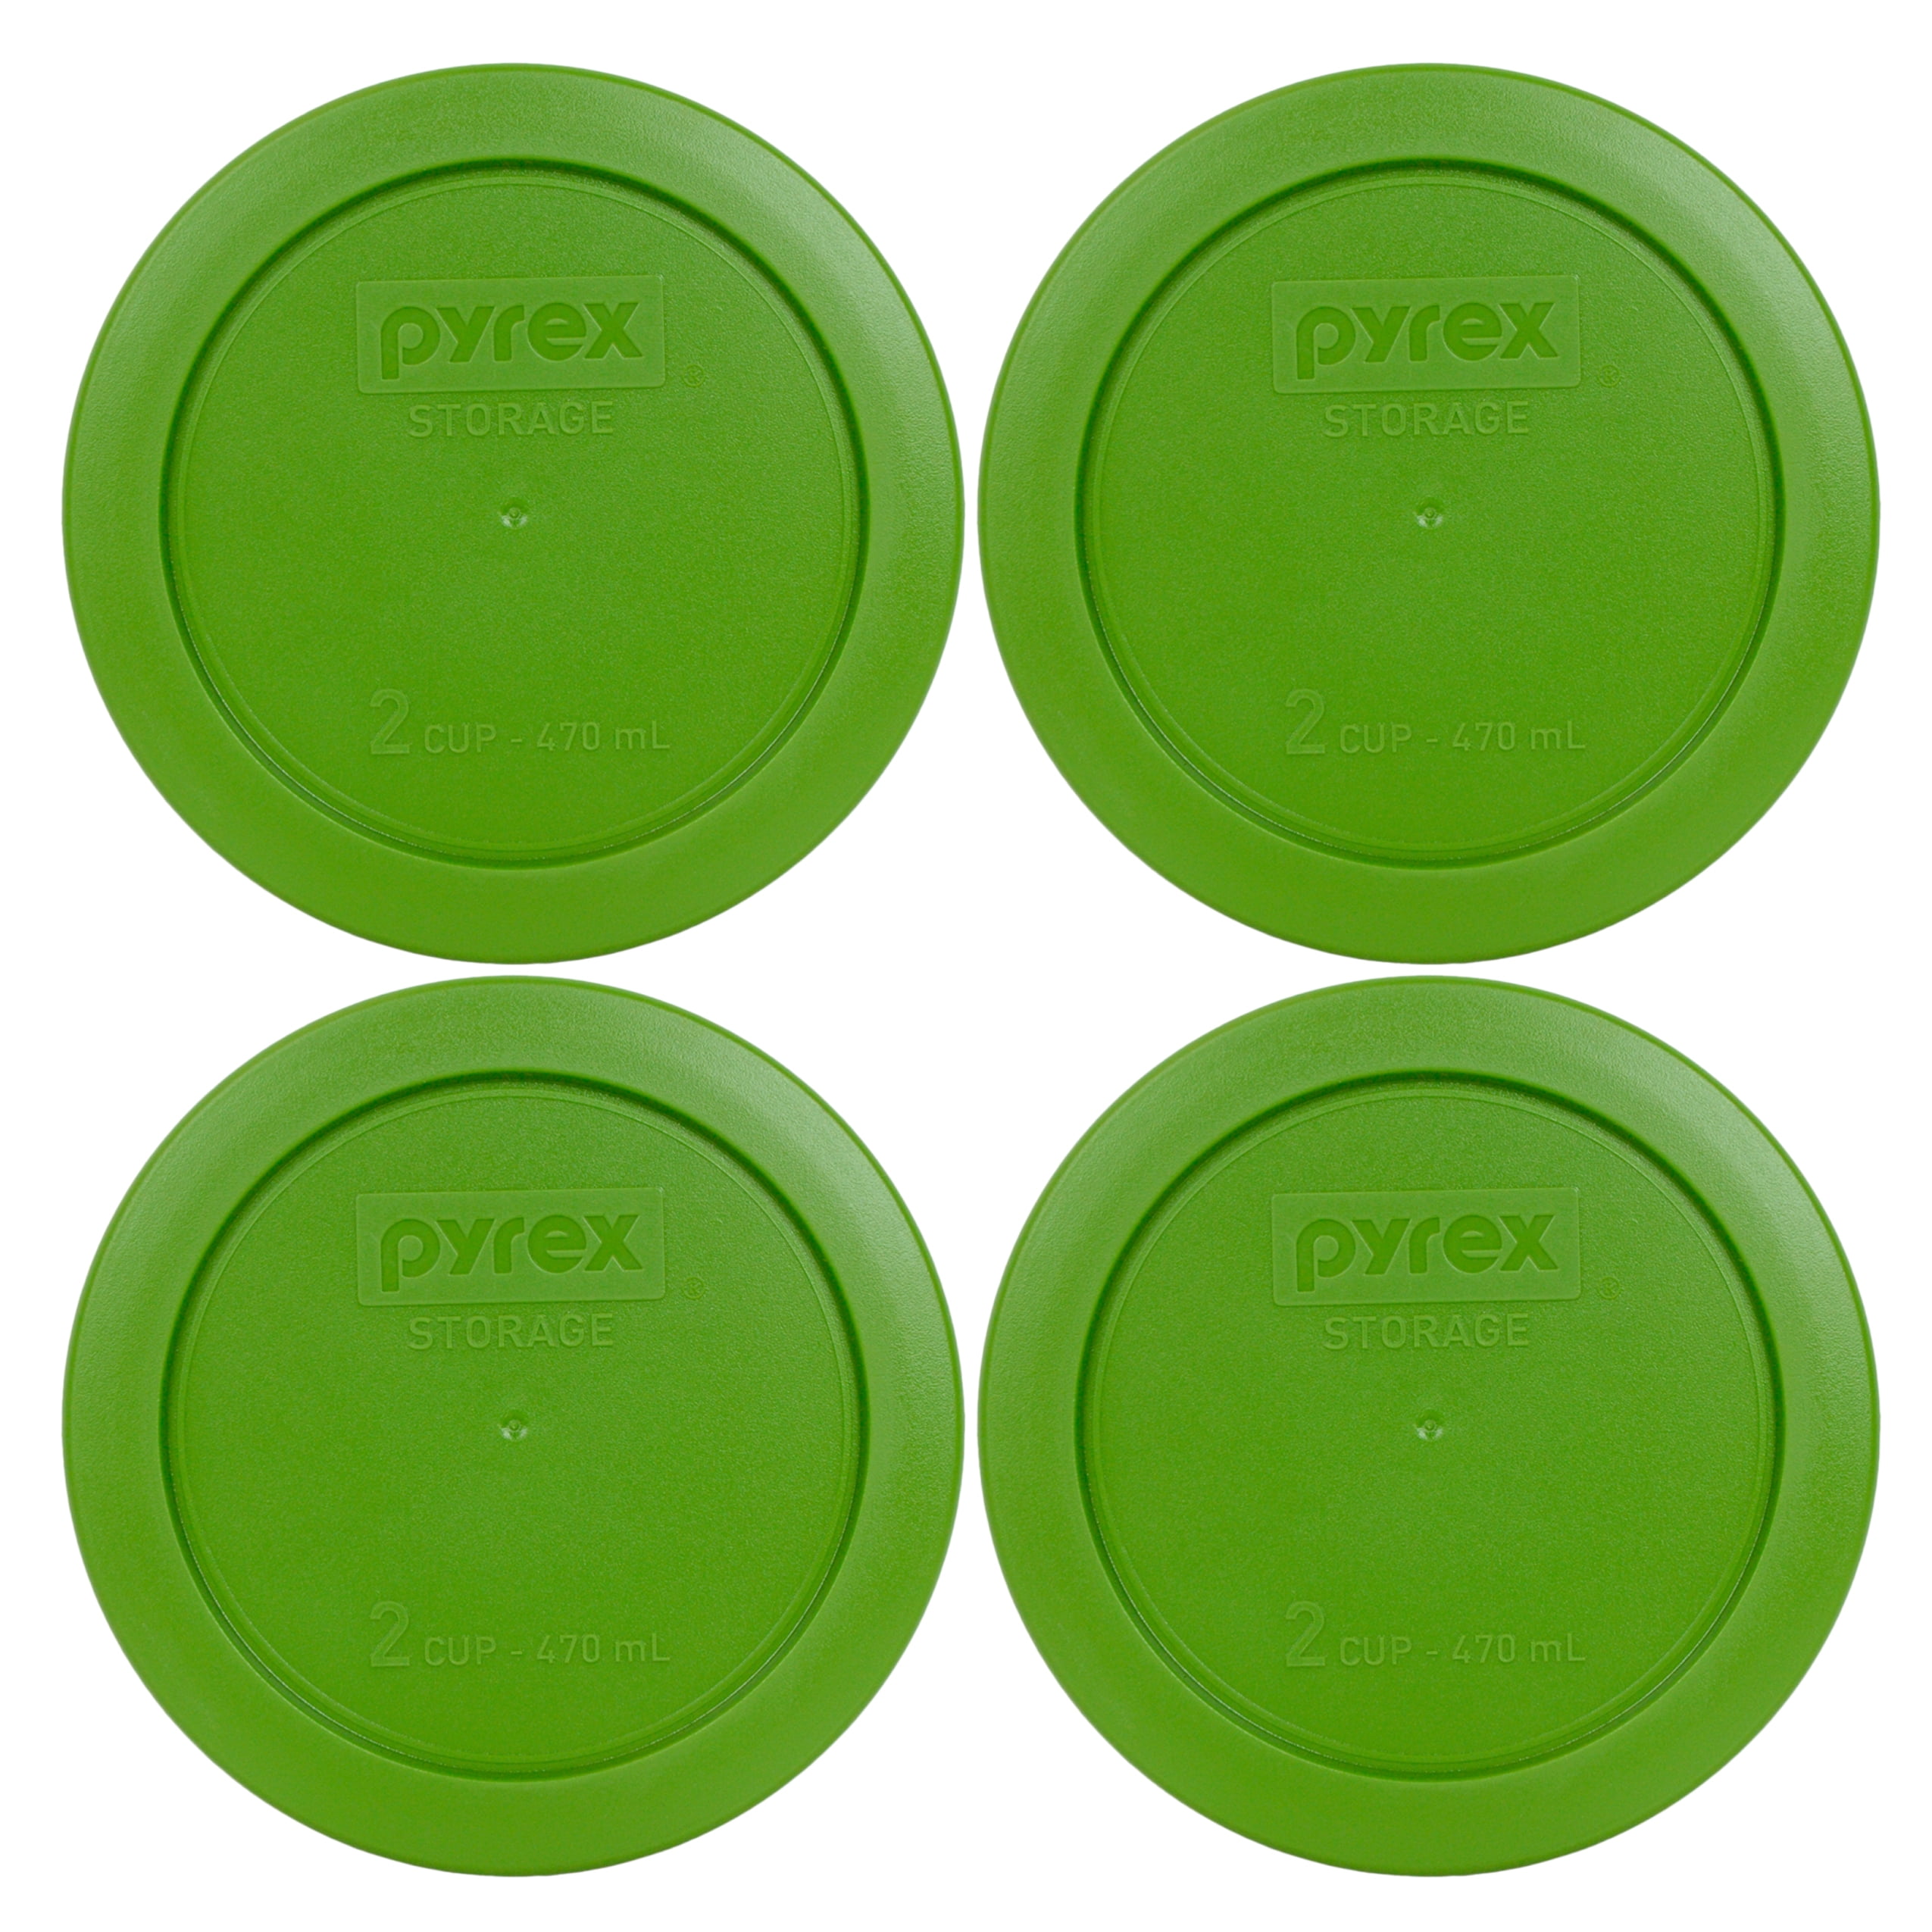 Pyrex 7200-PC Red 2 Cup Round Plastic Lid Covers 3PK for Glass Bowls New